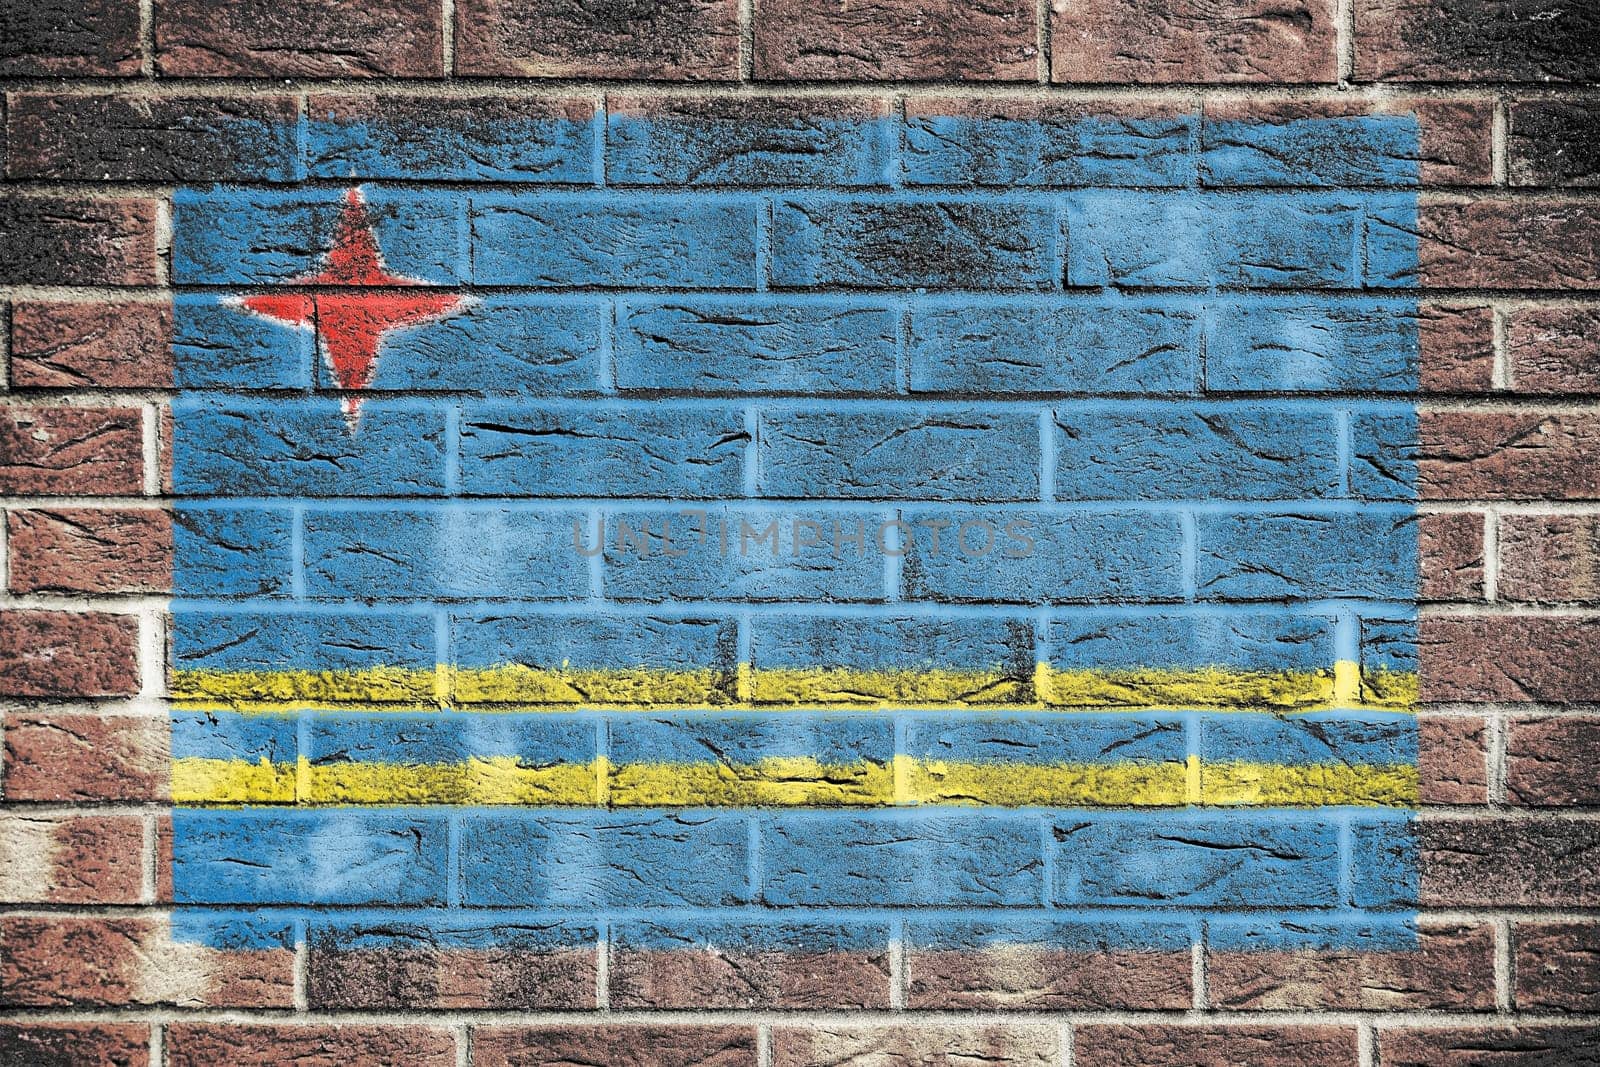 Aruba flag on a brick wall background by VivacityImages